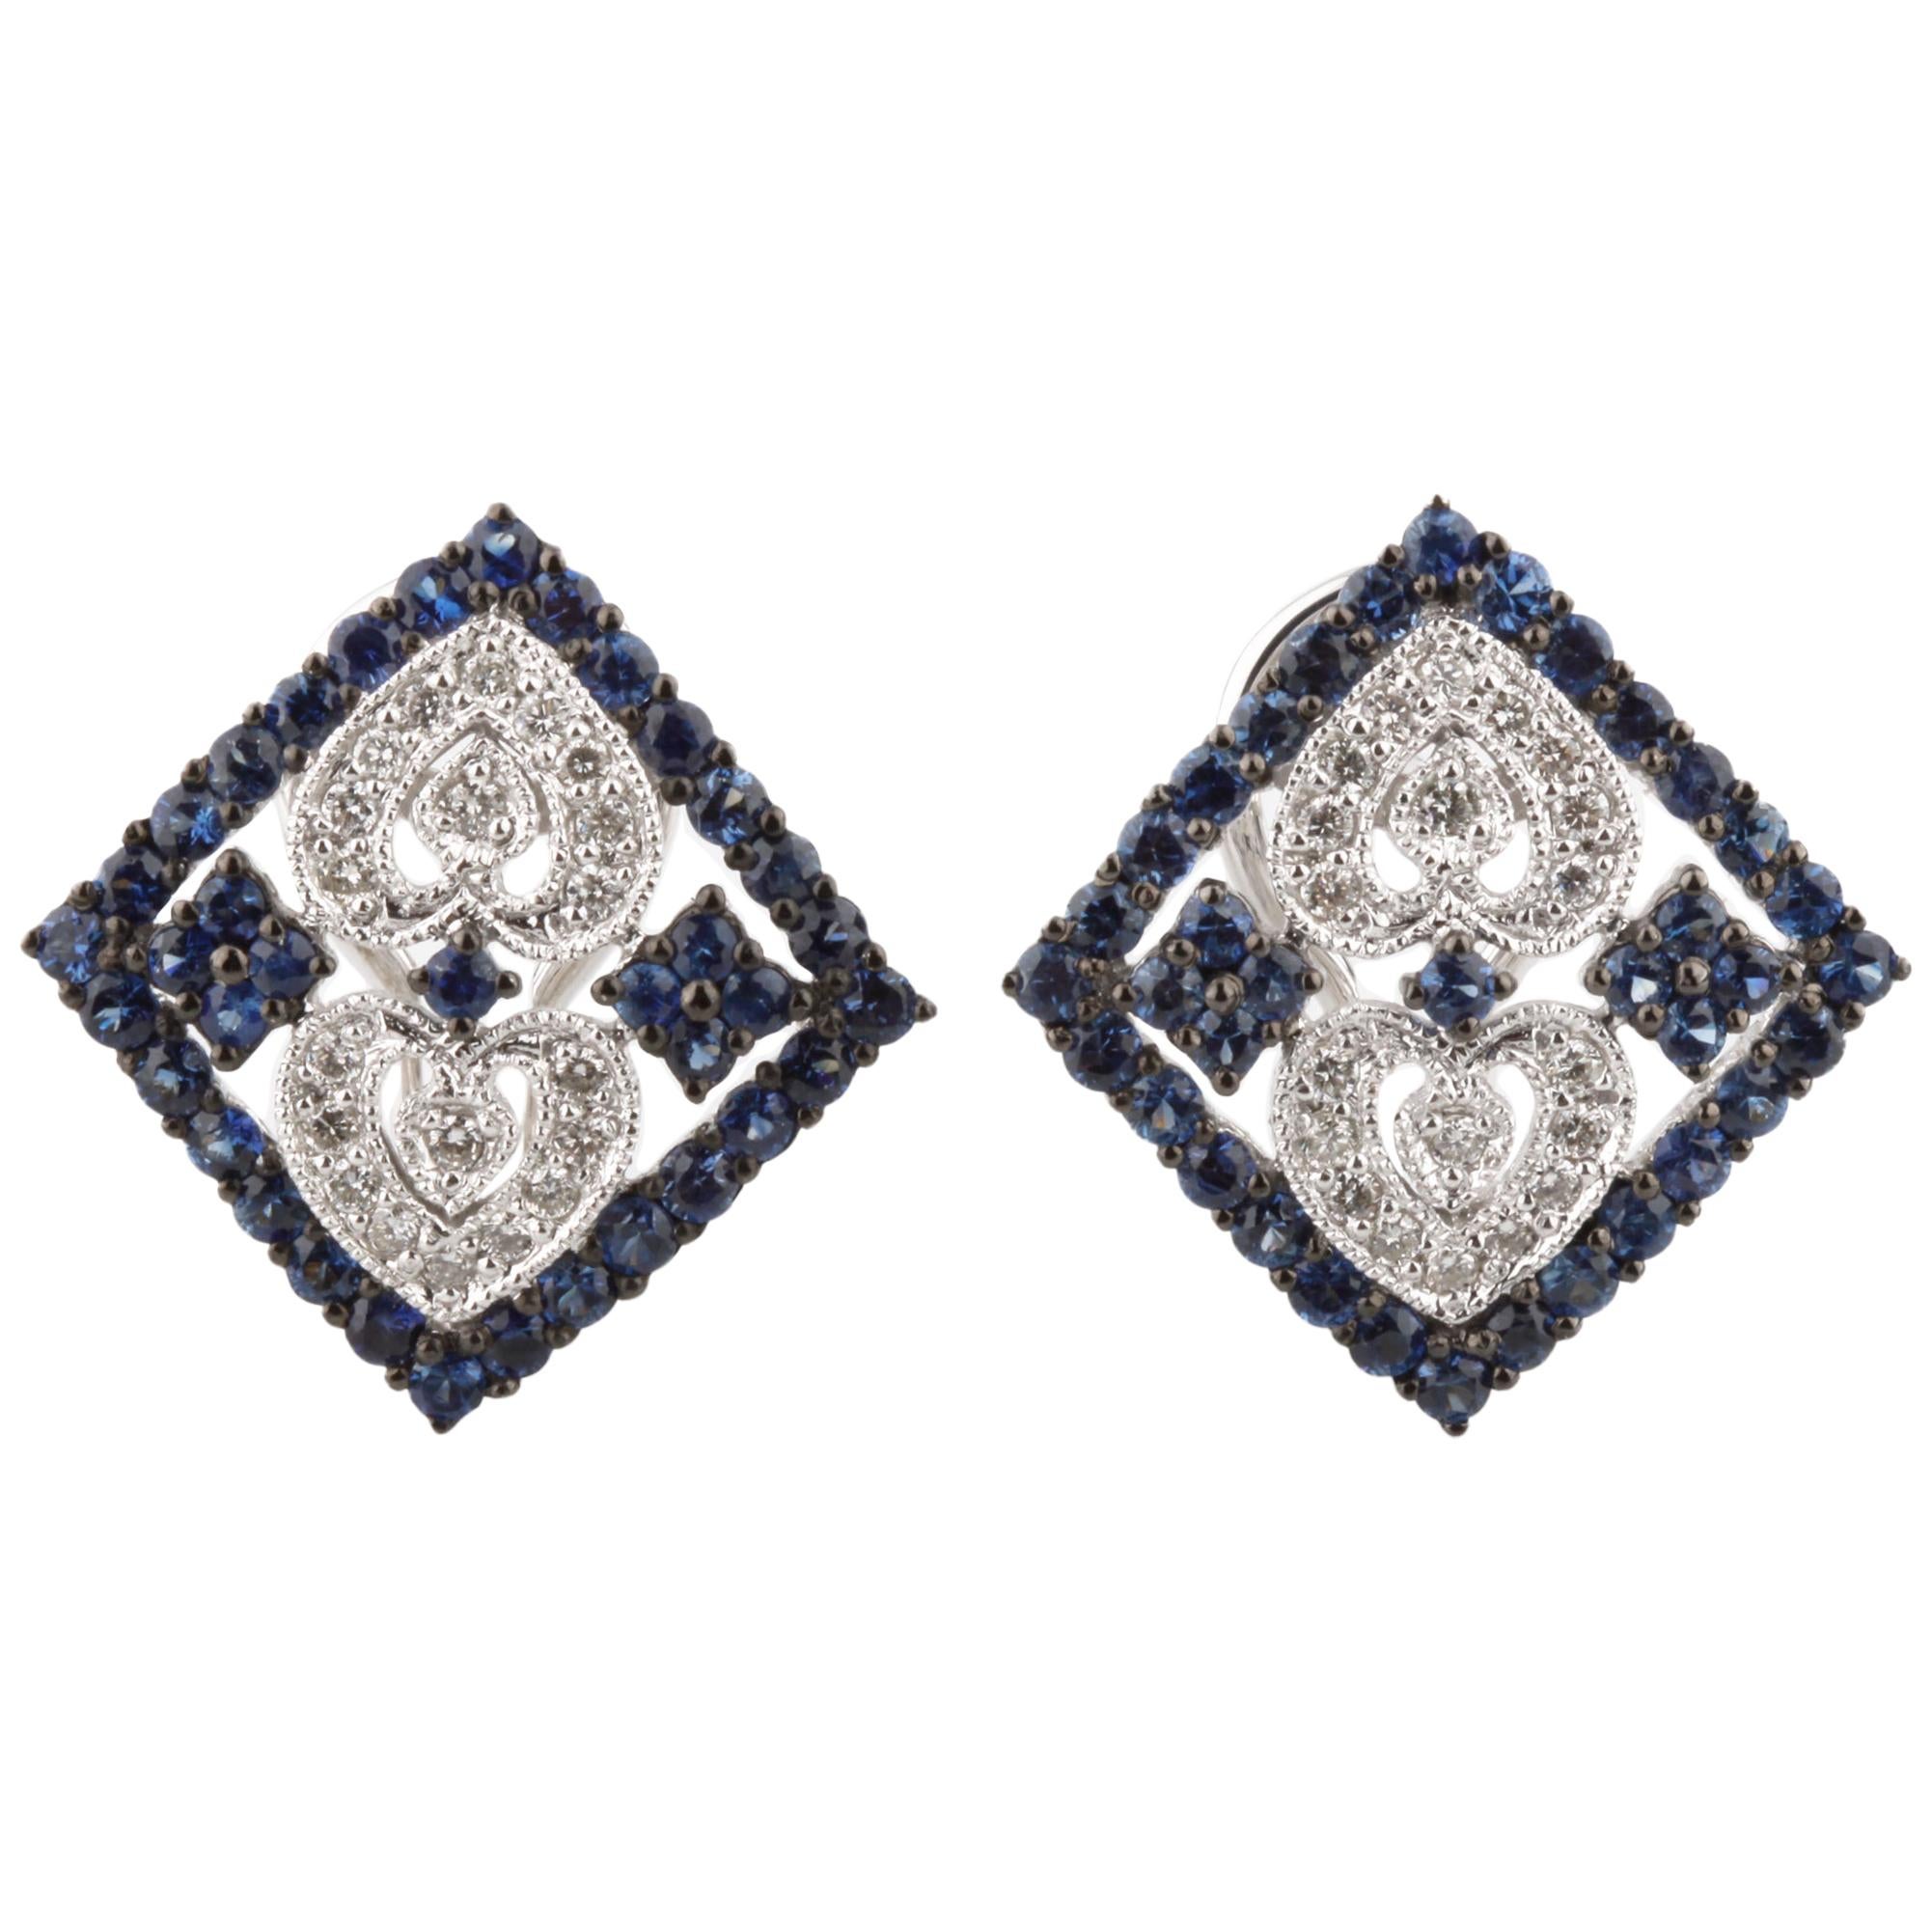 3 Carat Diamond and Sapphire Plaque Earrings in White Gold with Antiquing